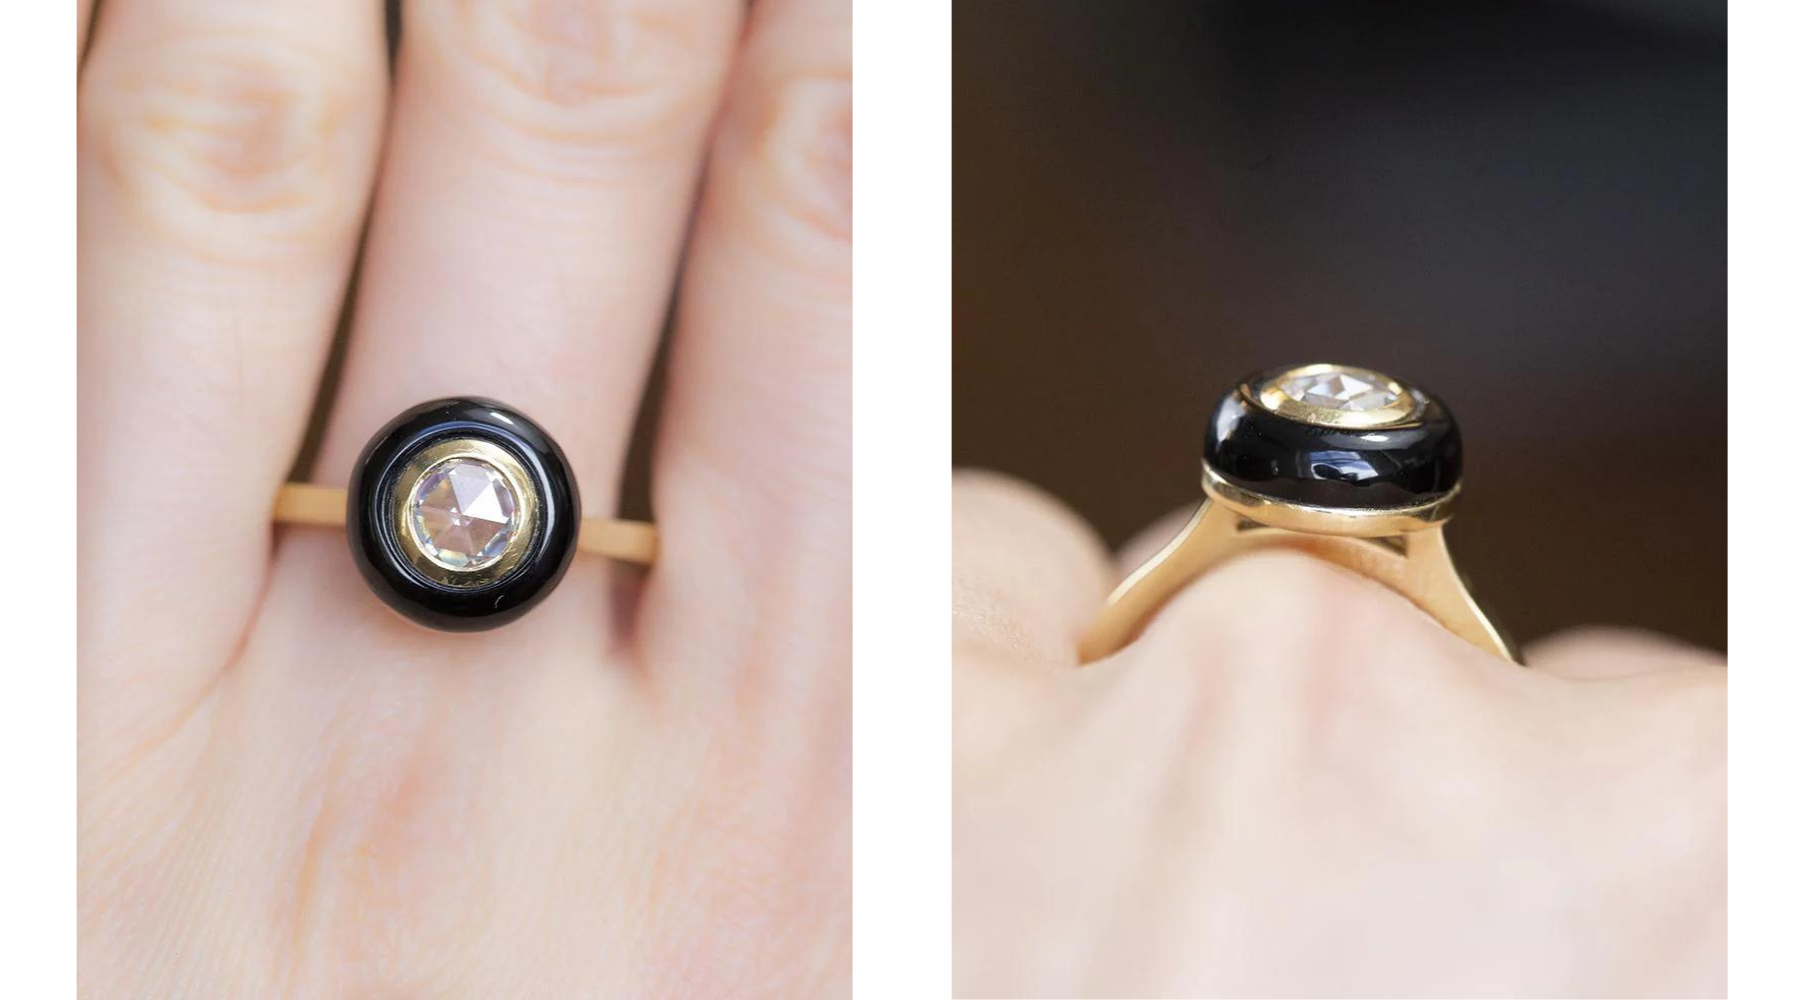 ART DECO ROSECUT MOISSANITE WITH BLACK ONYX HALO RING IN 18K YELLOW GOLD